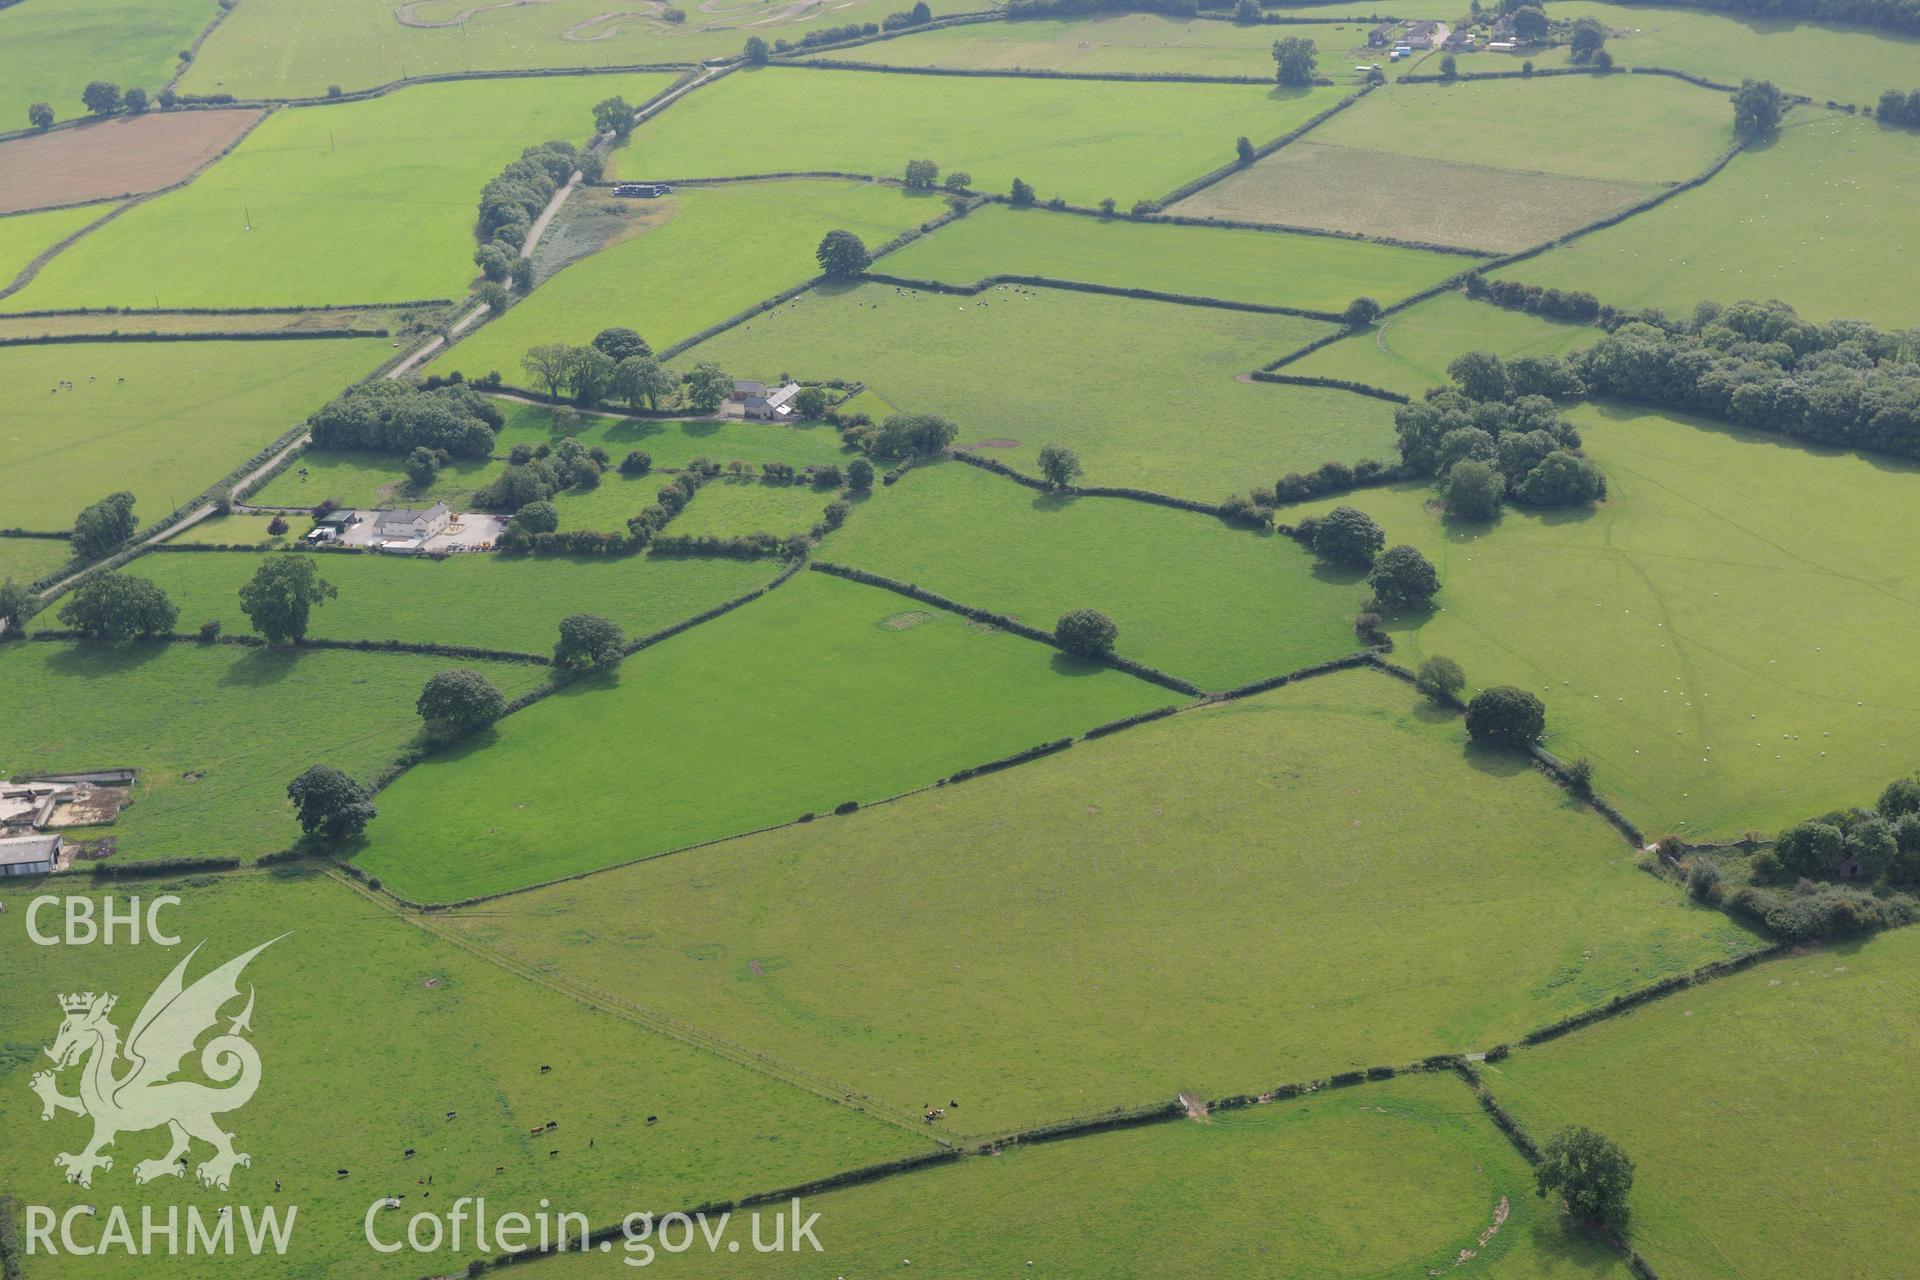 Llynfanod round barrow, near Holywell. Oblique aerial photograph taken during the Royal Commission's programme of archaeological aerial reconnaissance by Toby Driver on 11 September 2015.